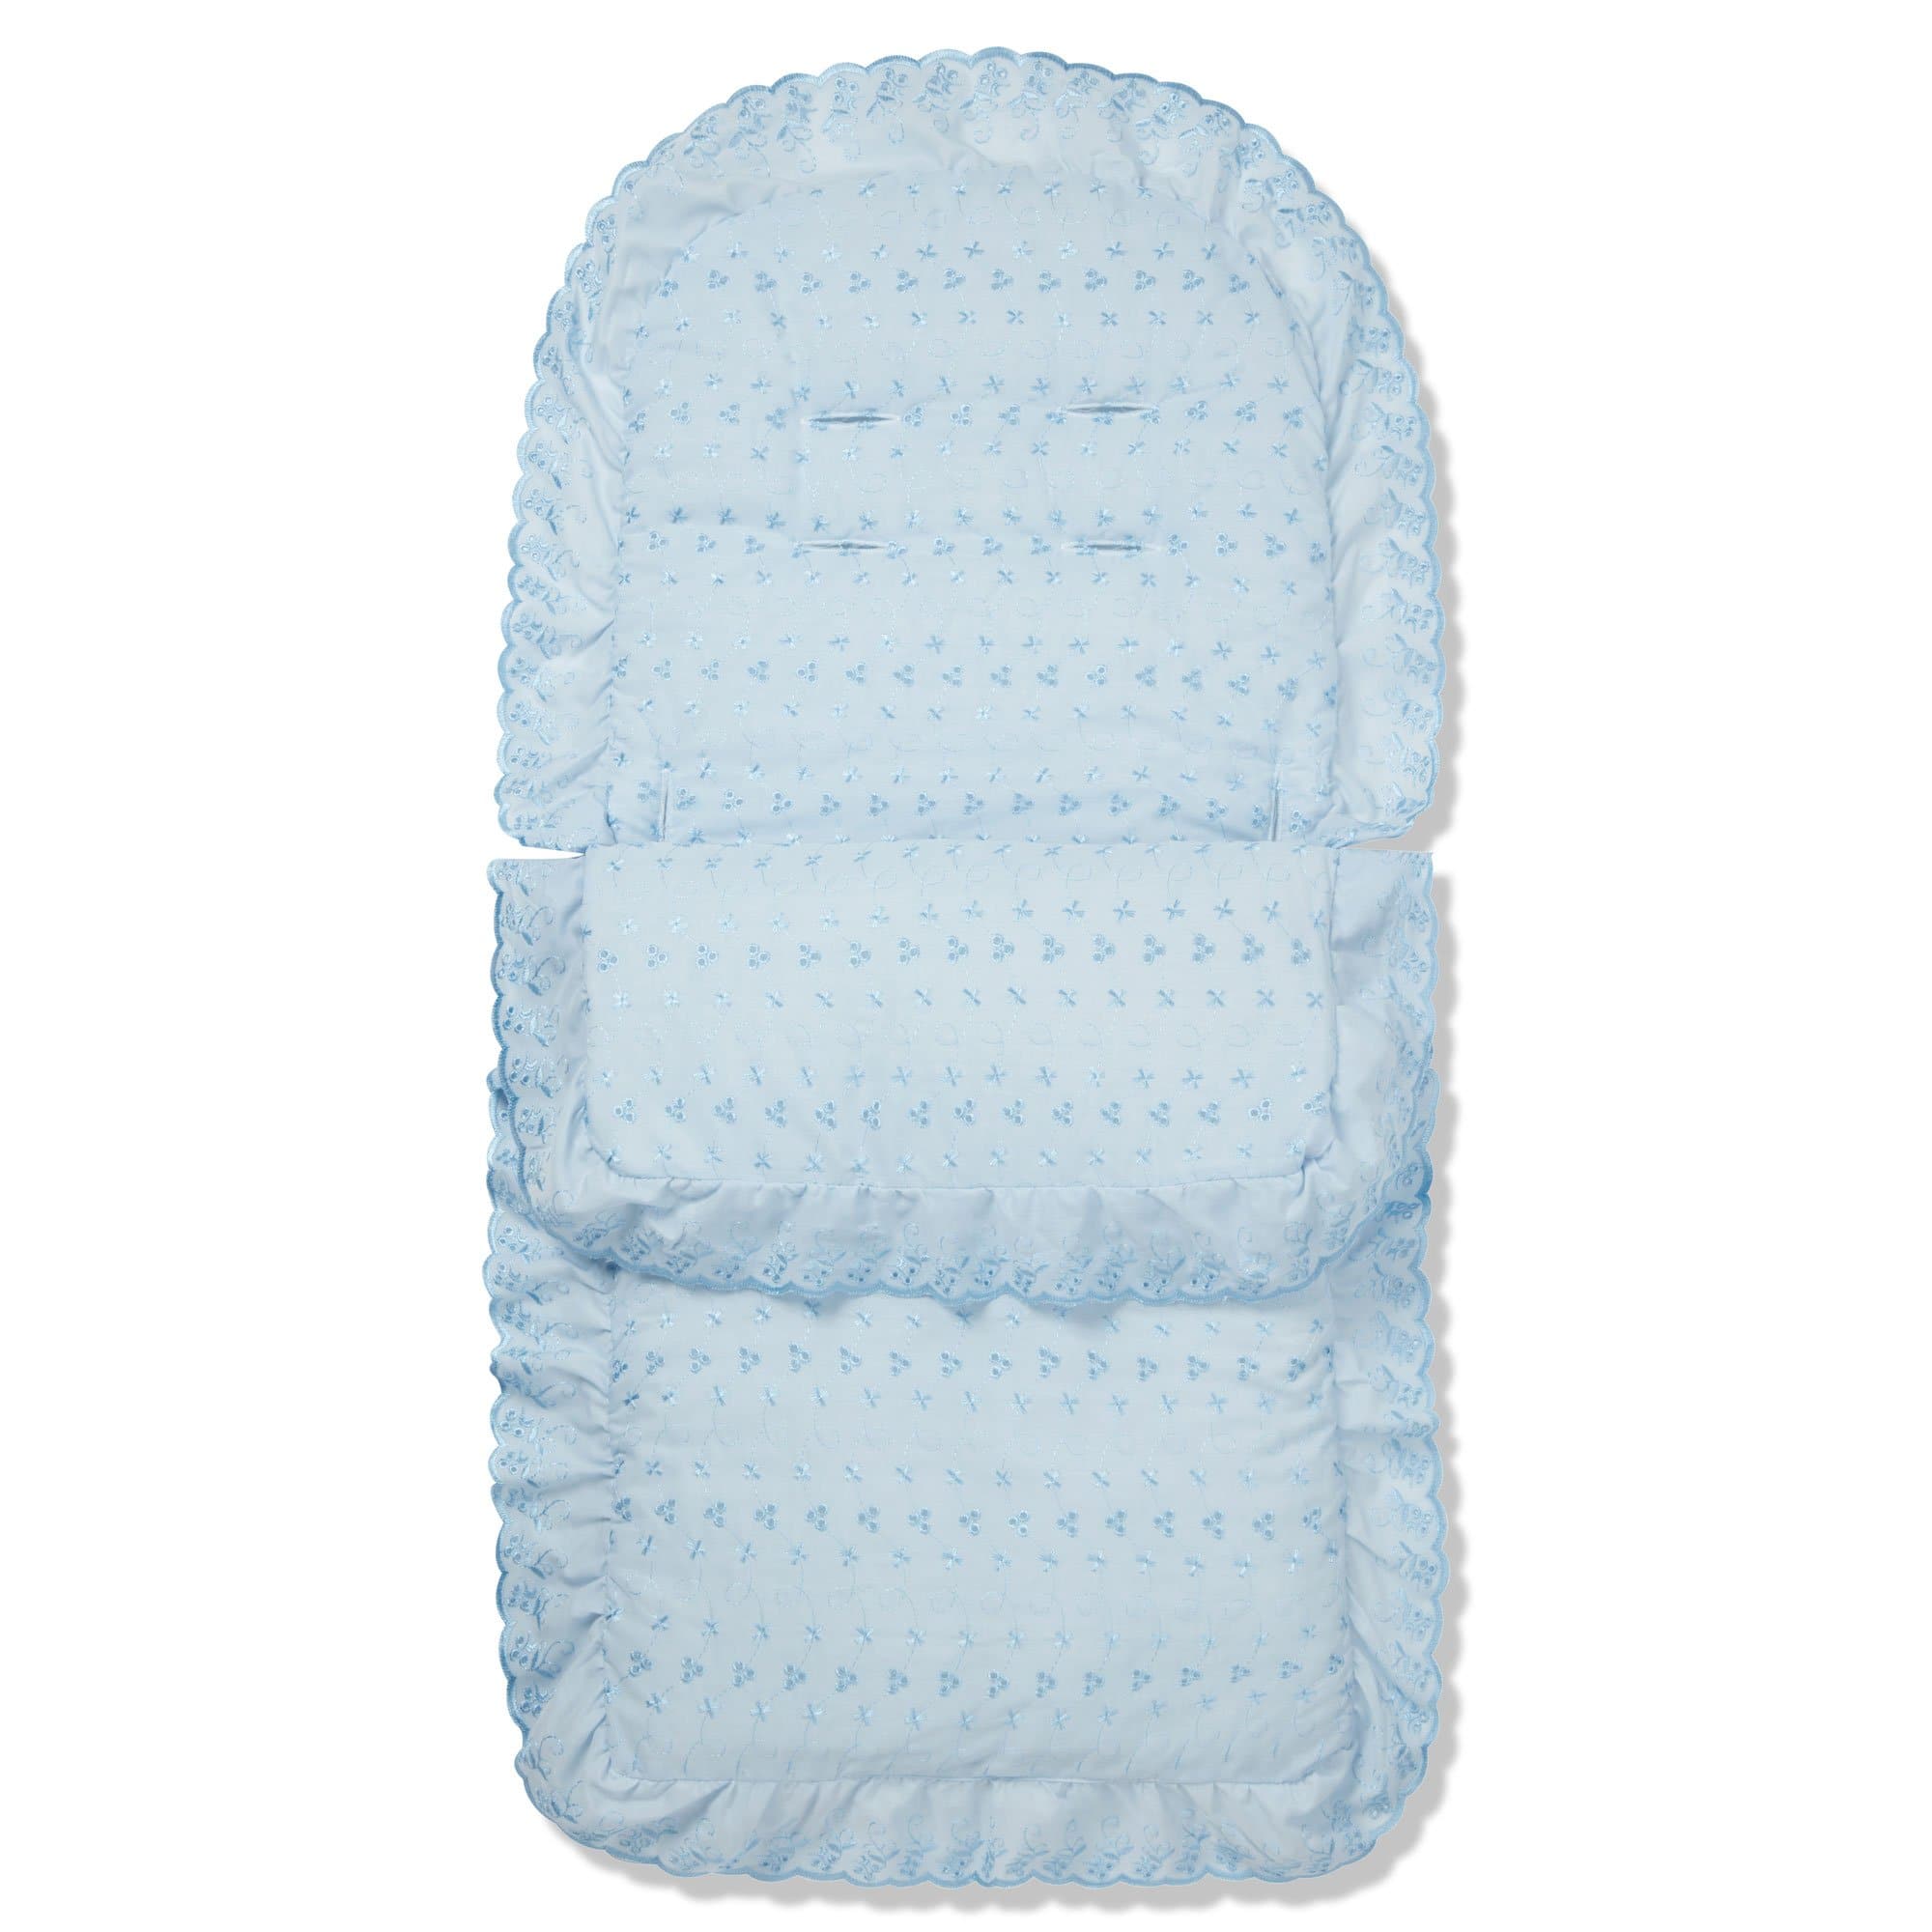 Universal Broderie Anglaise Pushchair Footmuff / Cosy Toes - Fits All Pushchairs / Prams And Buggies - Blue / Fits All Models | For Your Little One